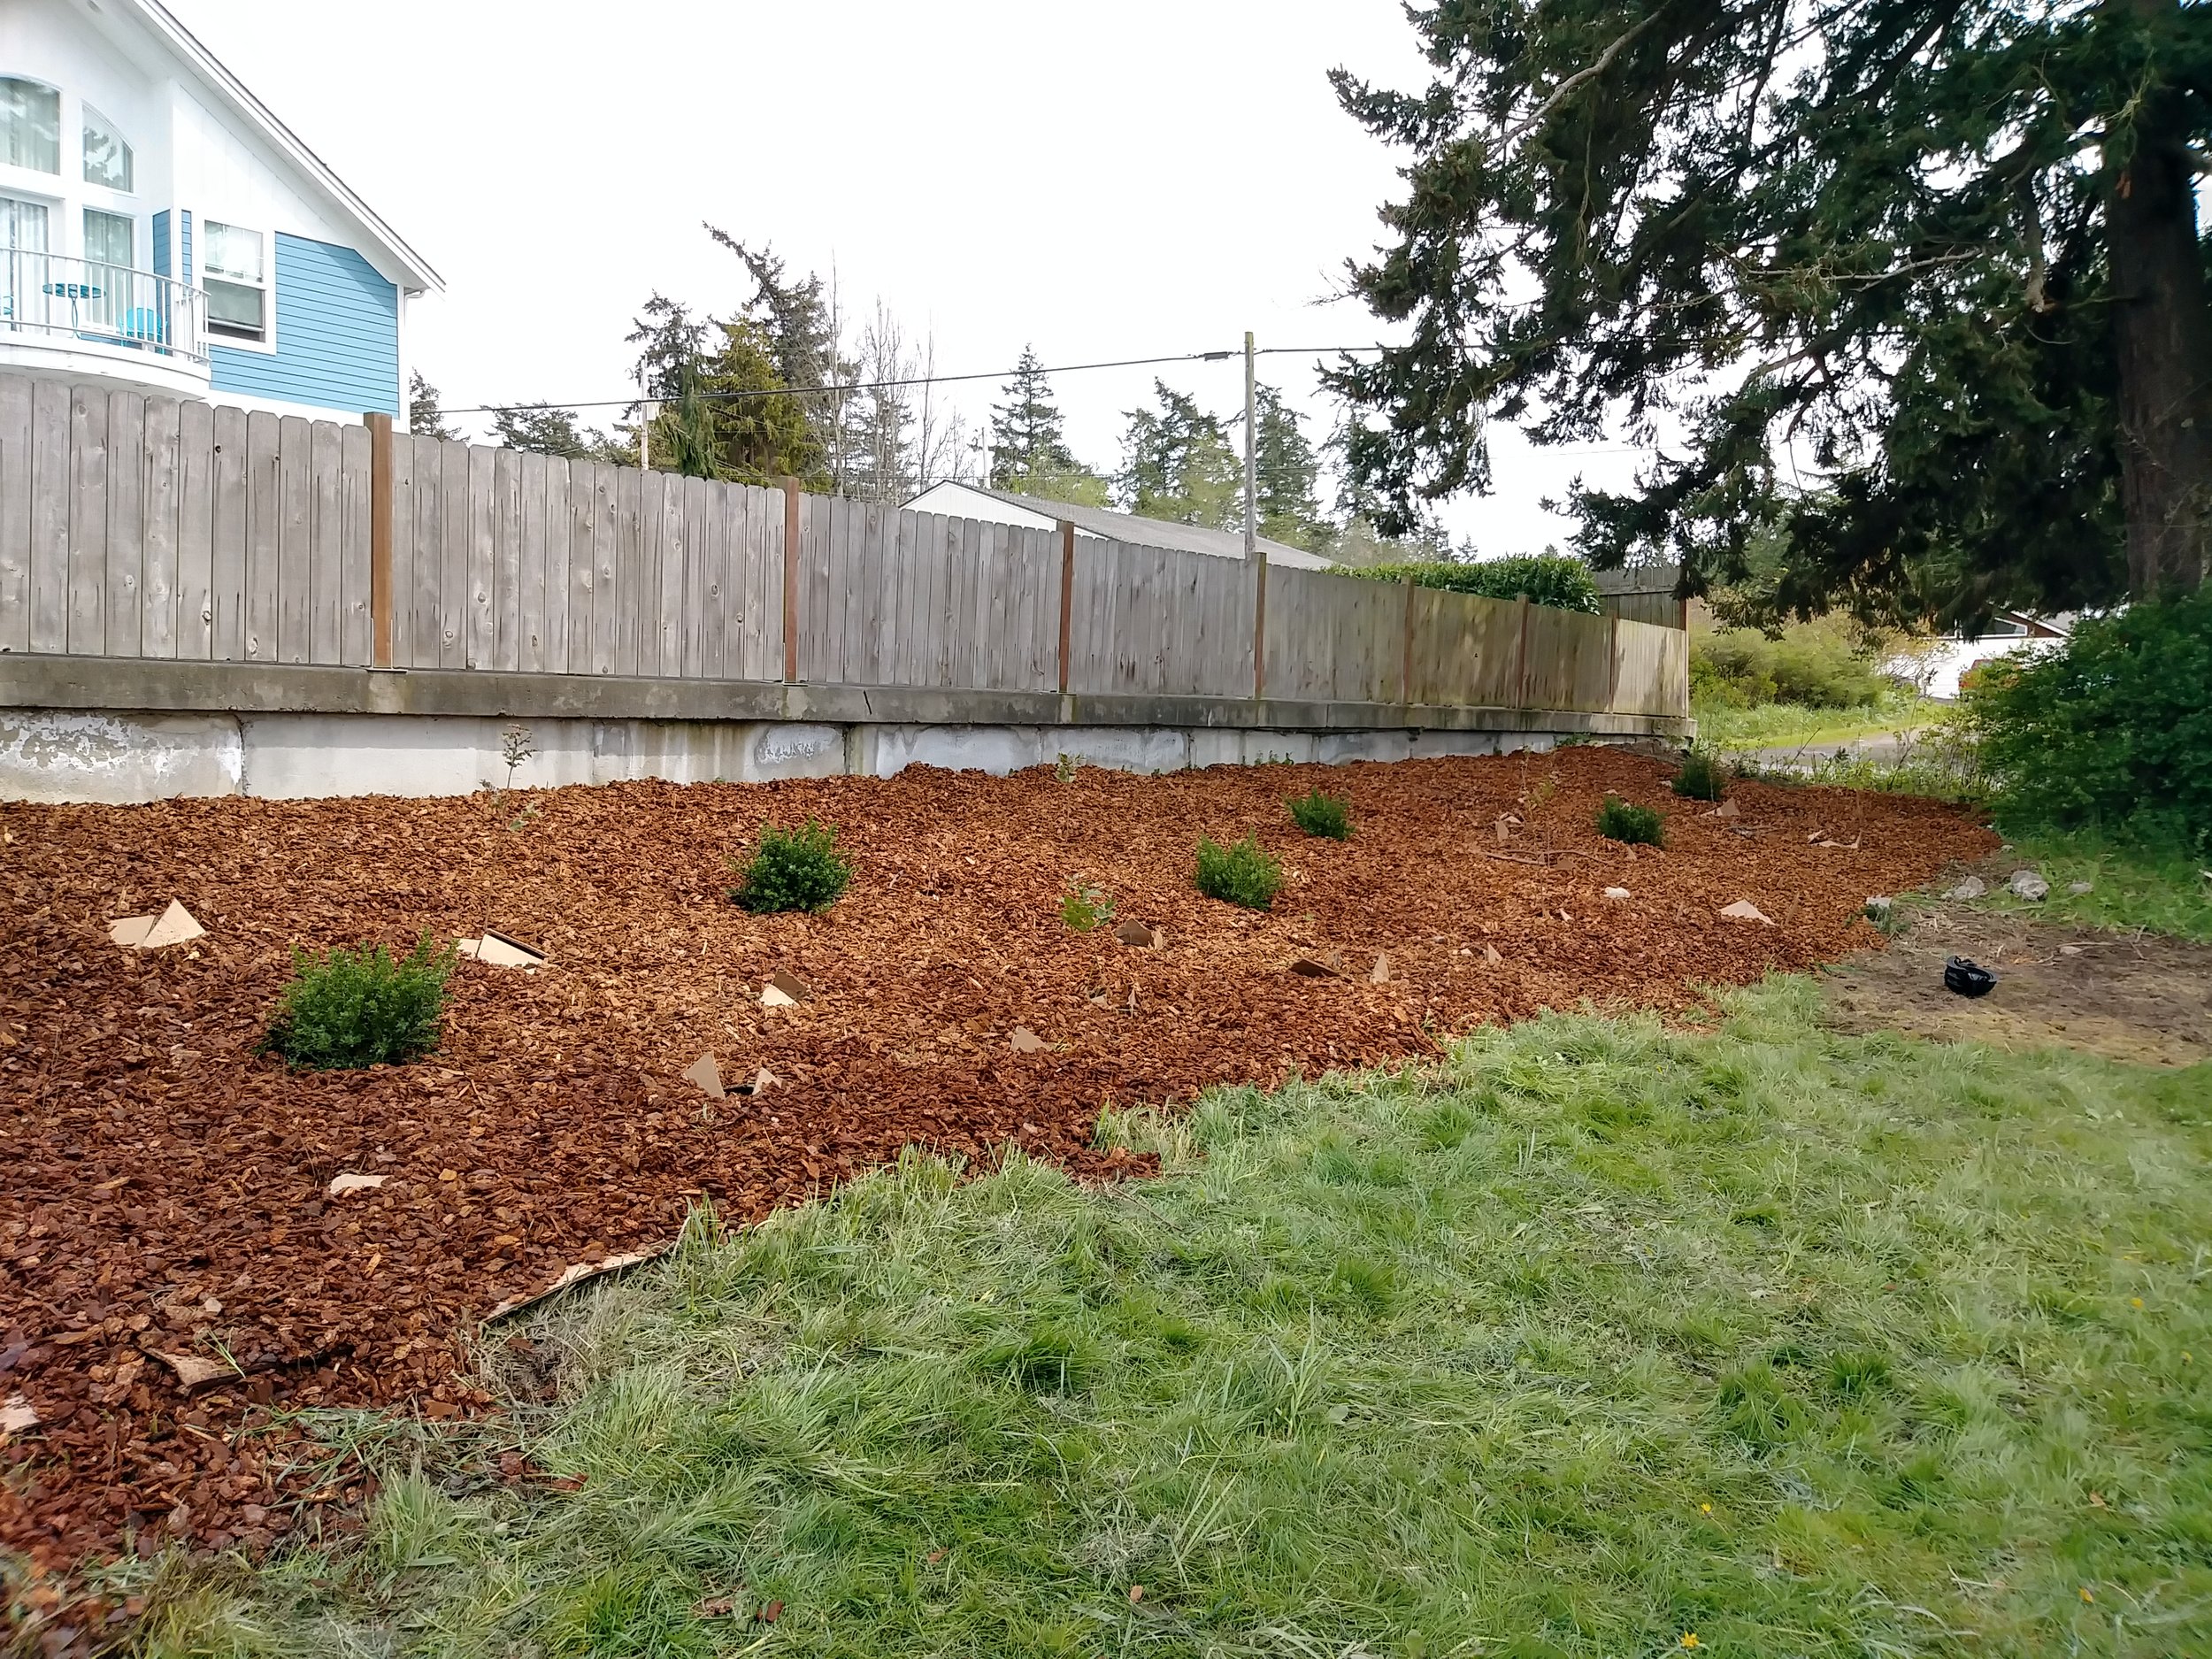 AFTER: The bed was then covered with mulch and appropriate plants to help retain water on this slope.